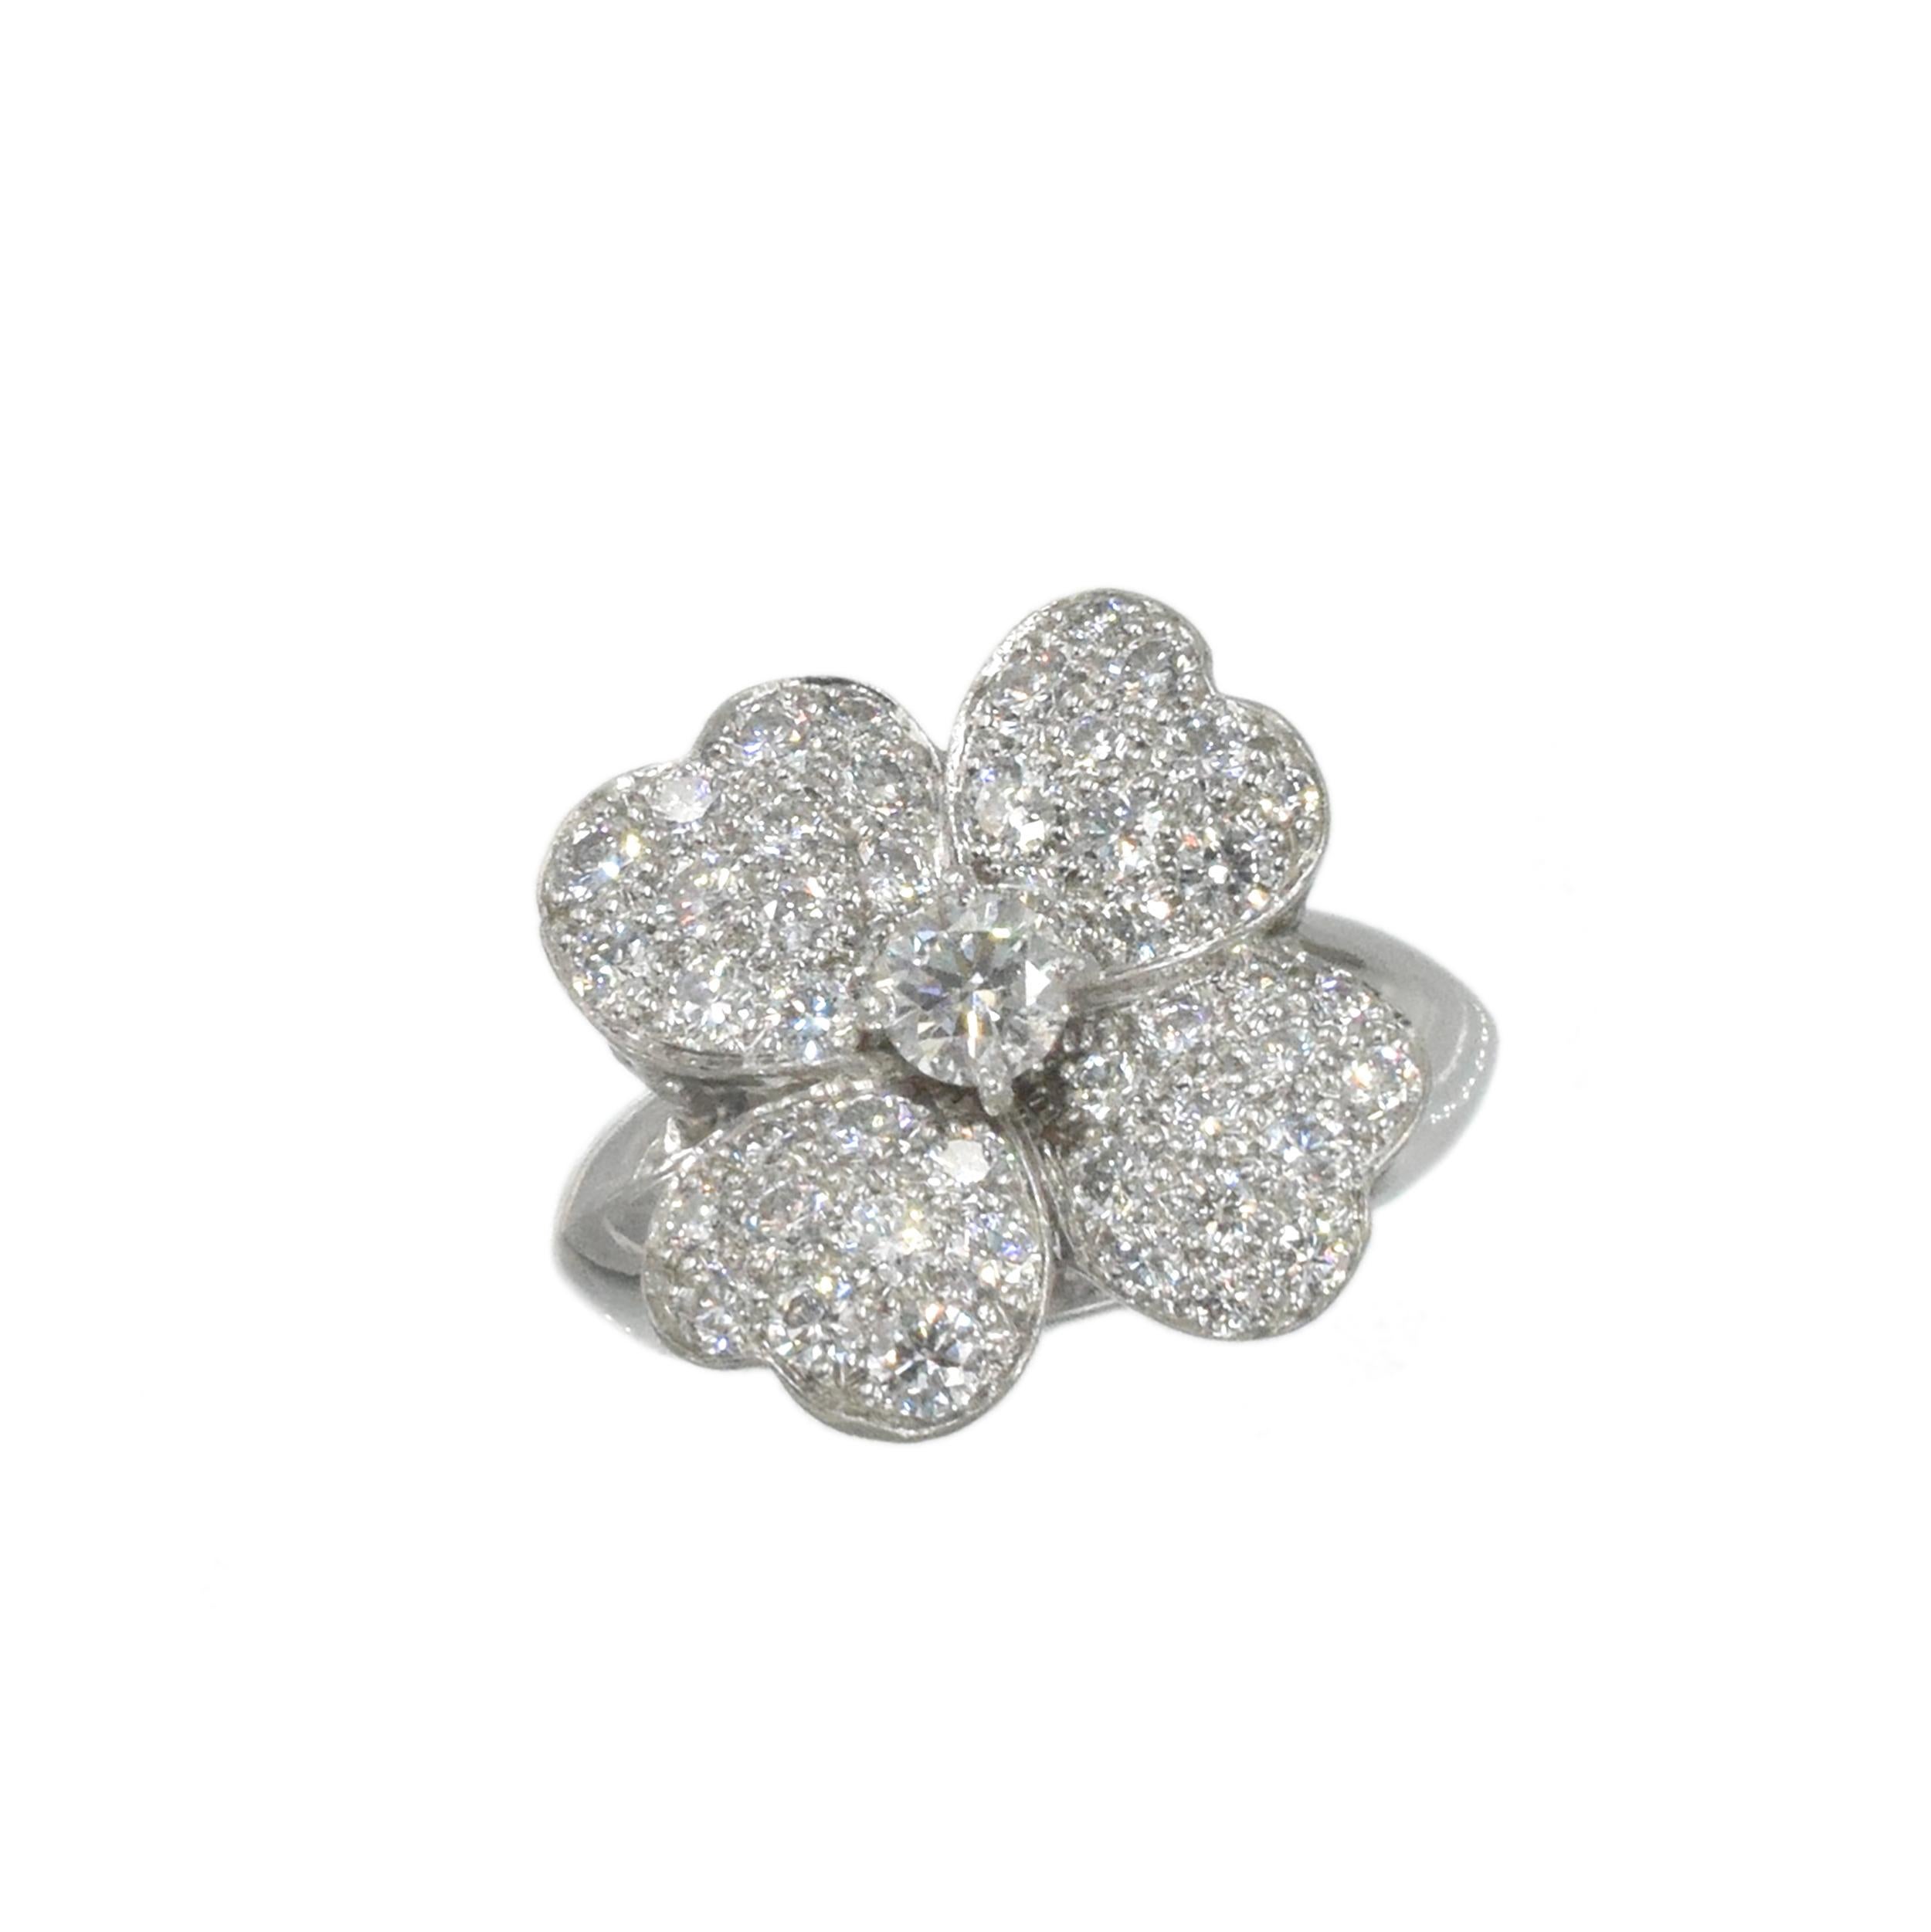 Van Cleef & Arpels Diamond 'Cosmos' Ring. Medium size.
This  ring has a flower motif with round
diamonds weighing approximately 1.50 carats including center approximate 0.25 carat  all
set in 18k white gold.  No. BL270398, 750, 50. Finger Size: 50